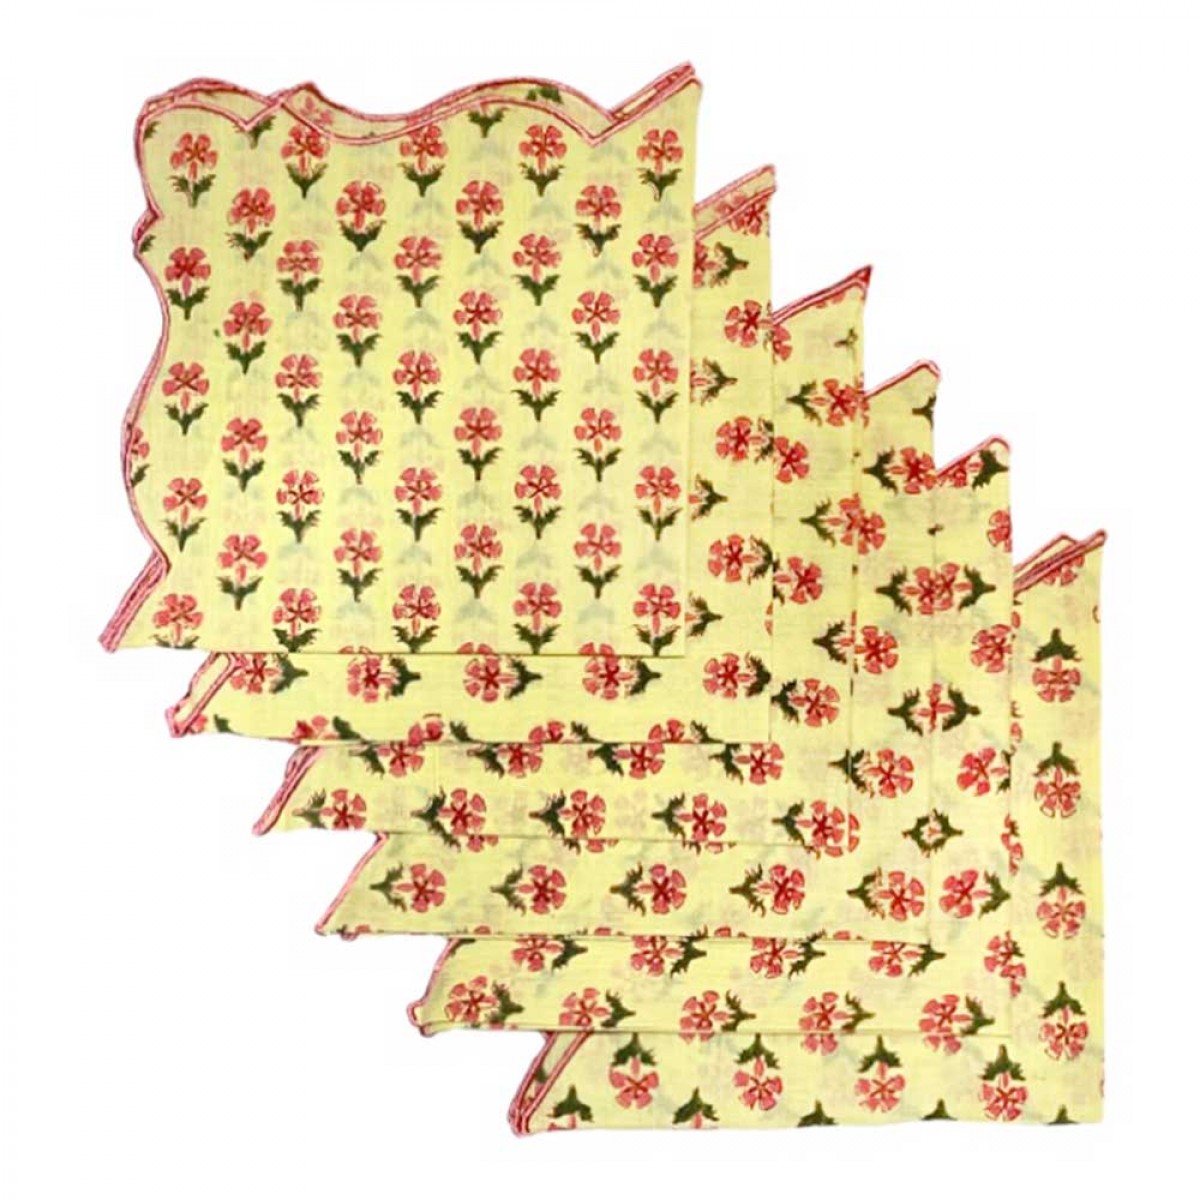 Cotton Scallop Embroidered Printed Napkin - Yellow (Set of 6)